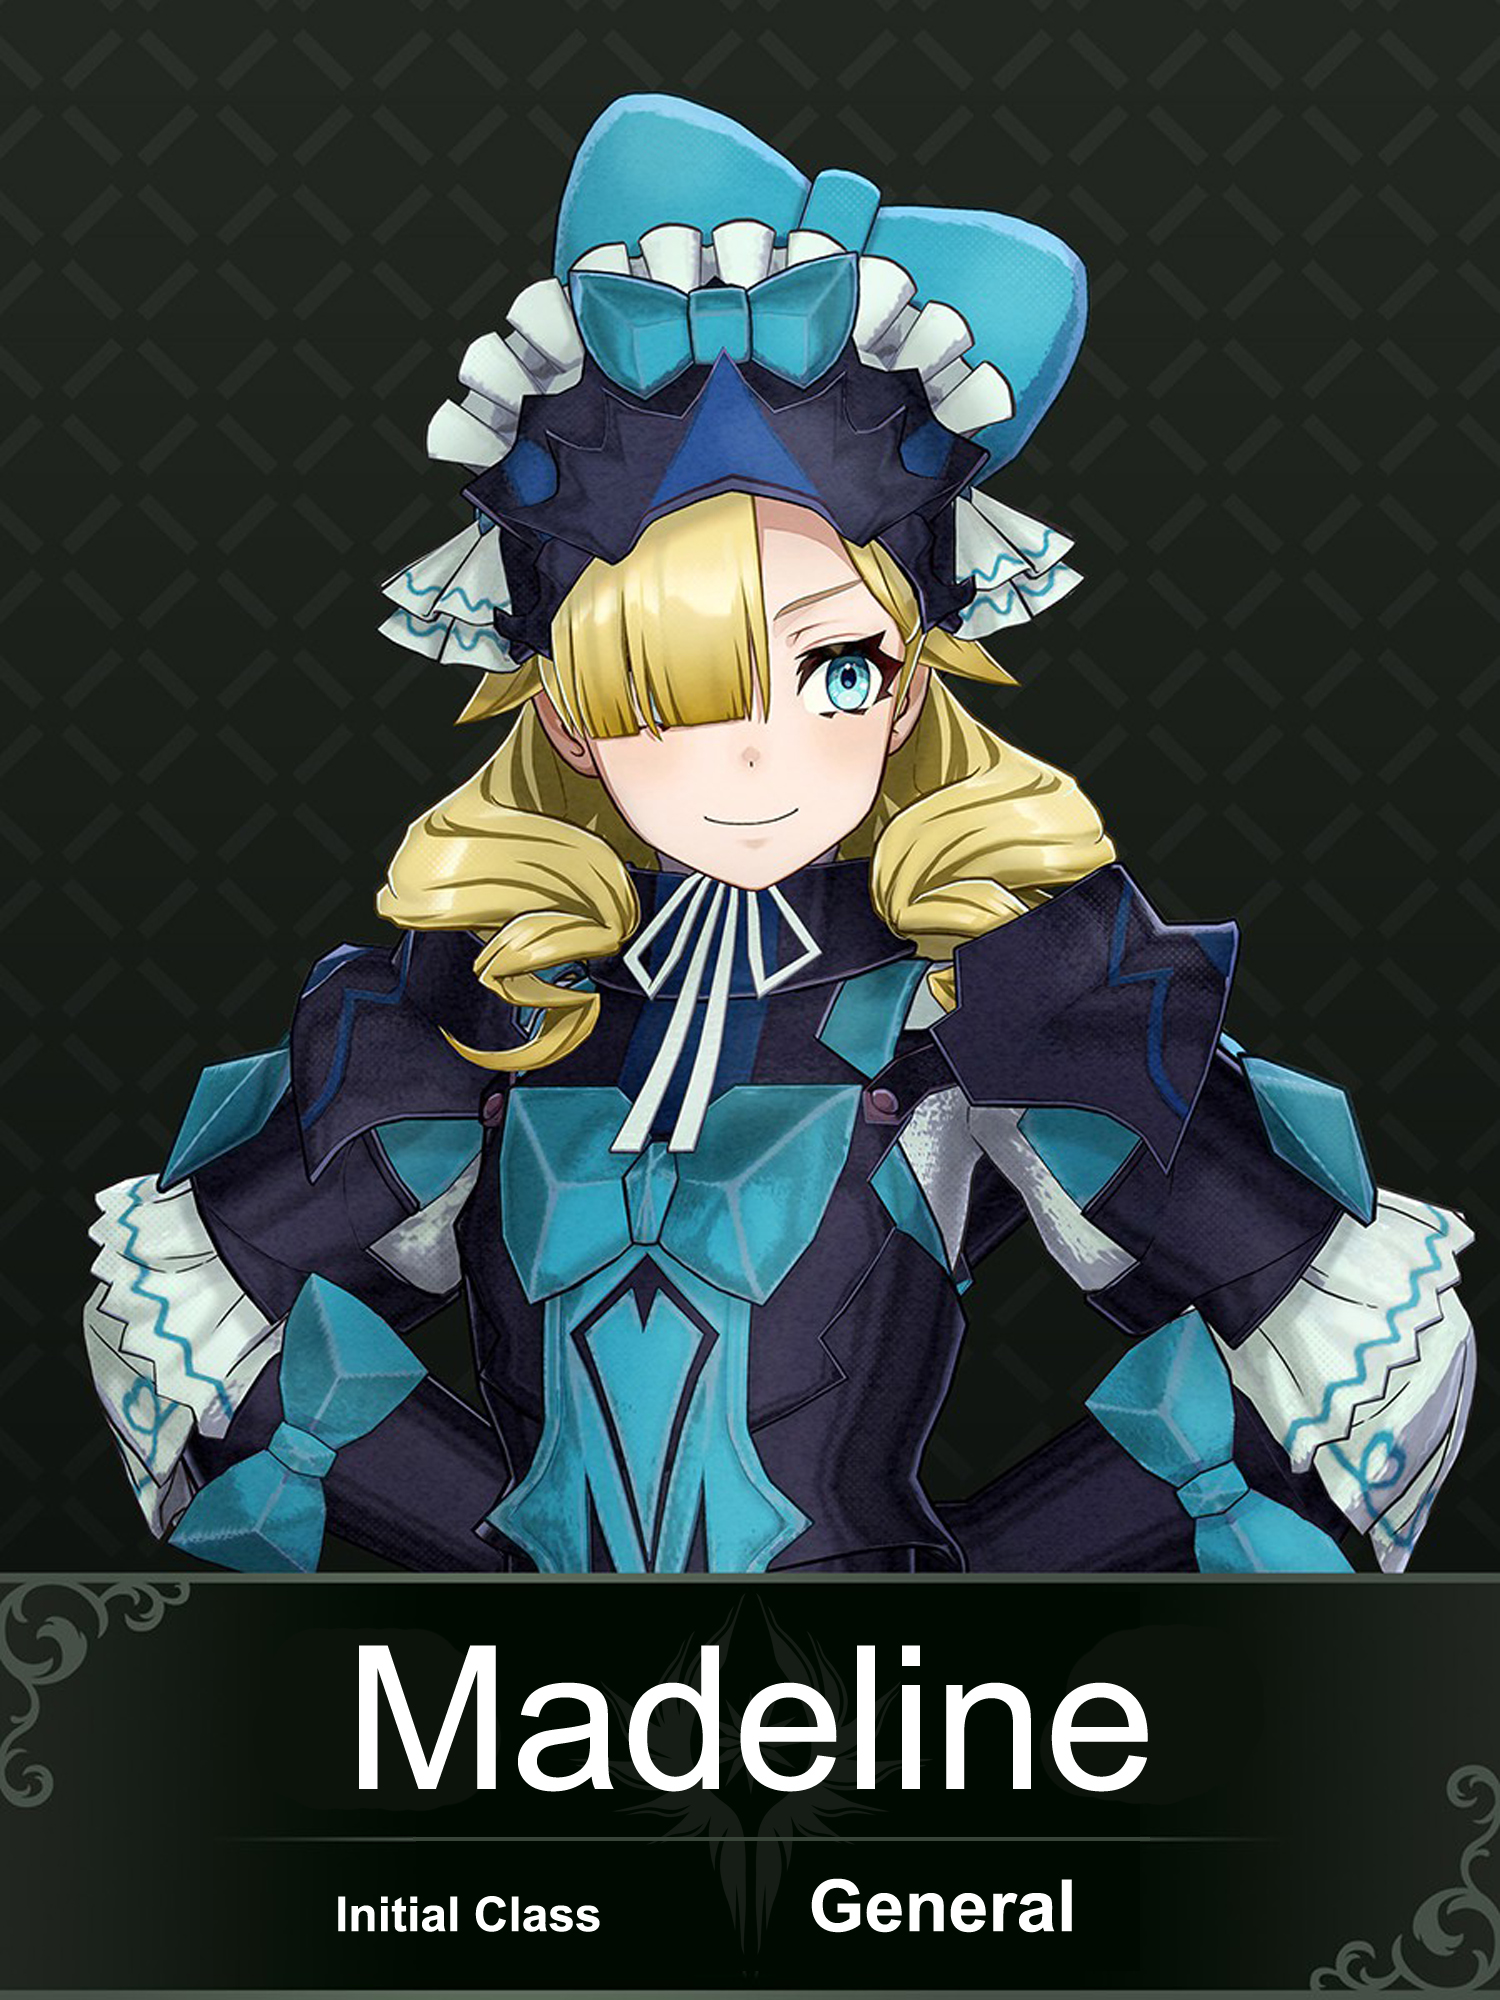 Madeline Blondeau, Author at Anime Herald